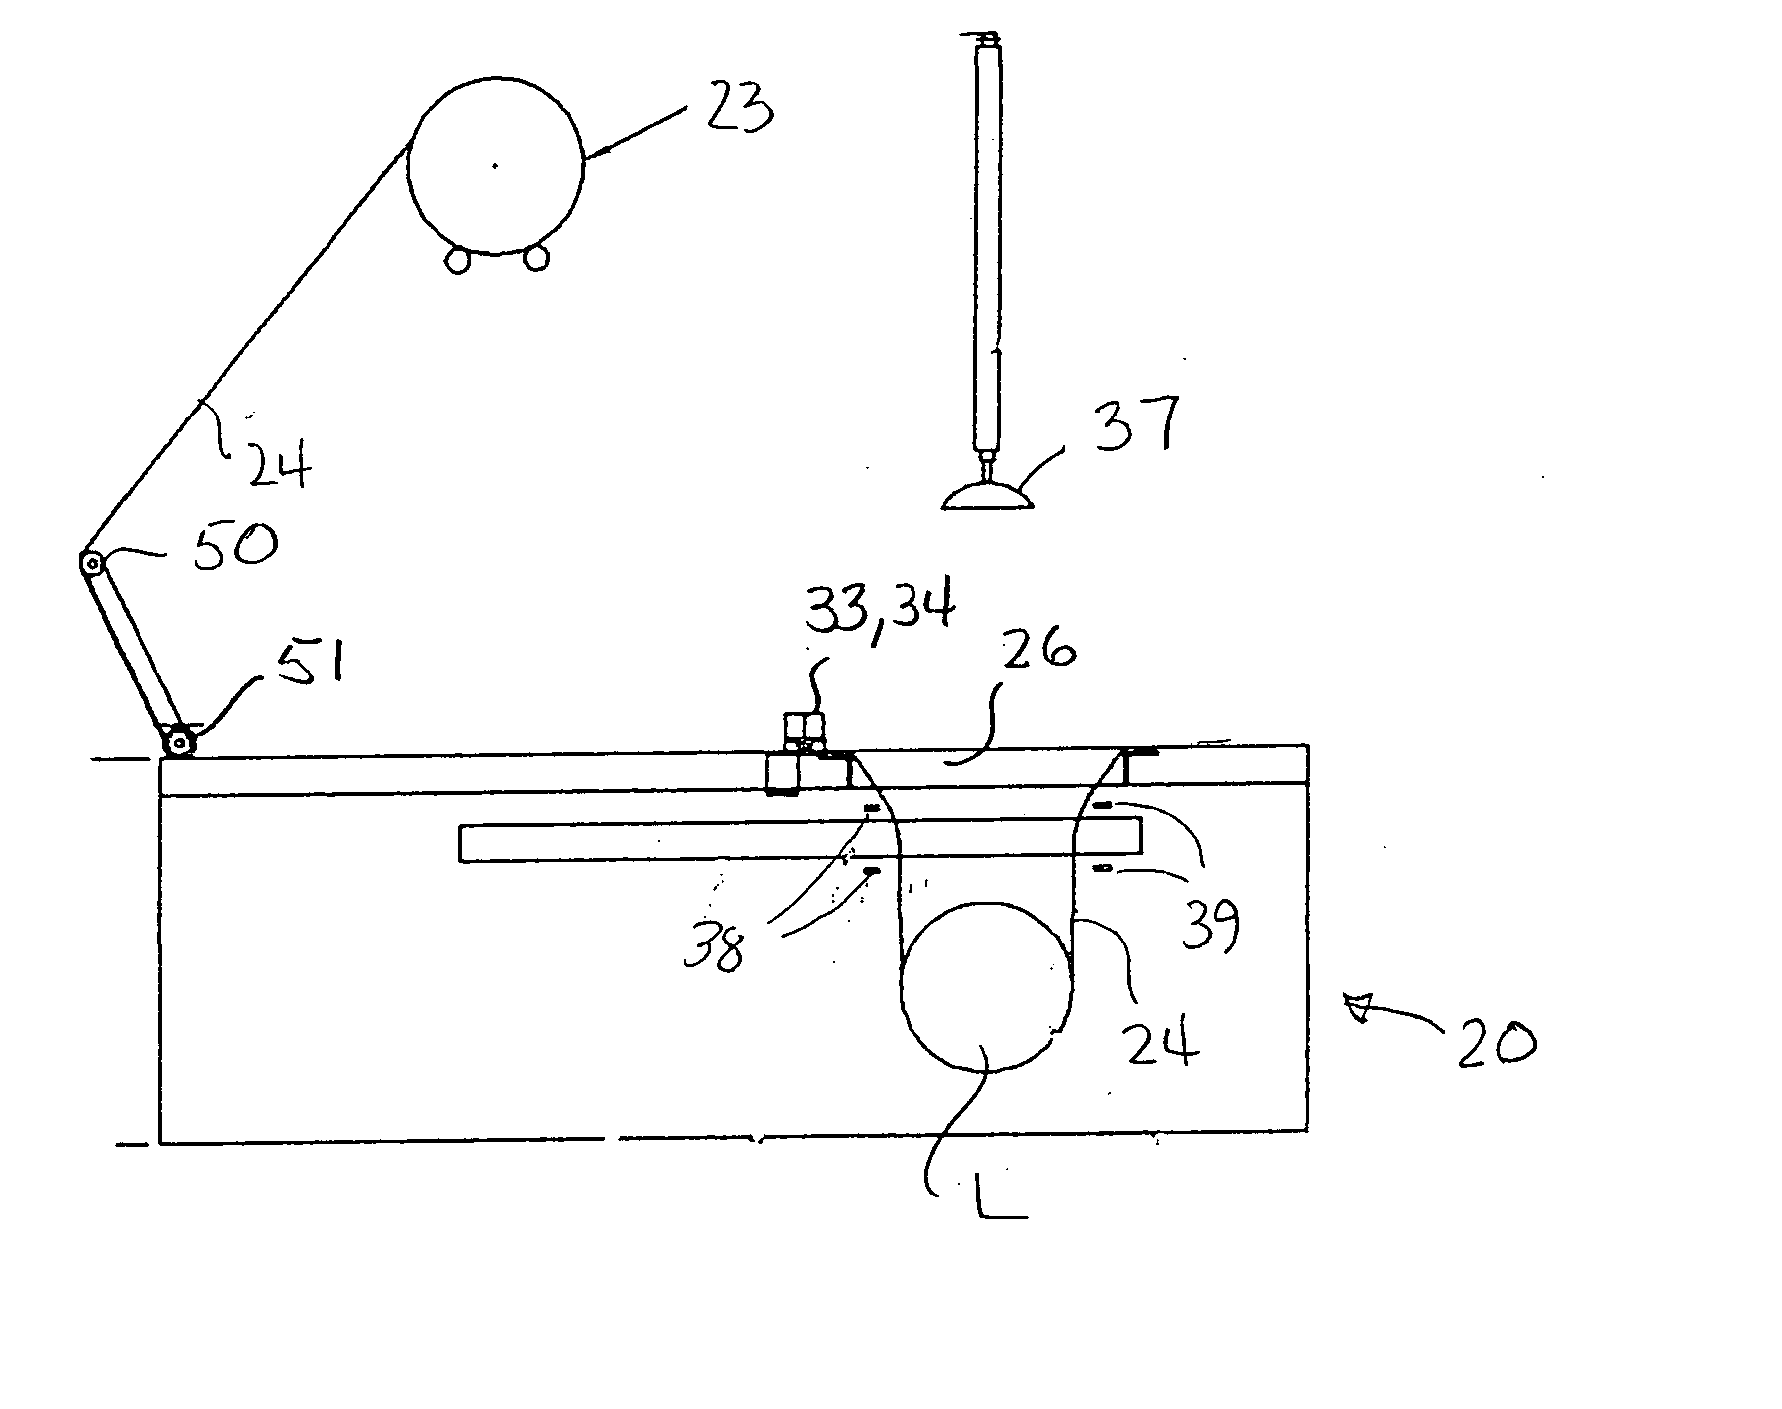 Apparatus and method for stretch-wrapping articles